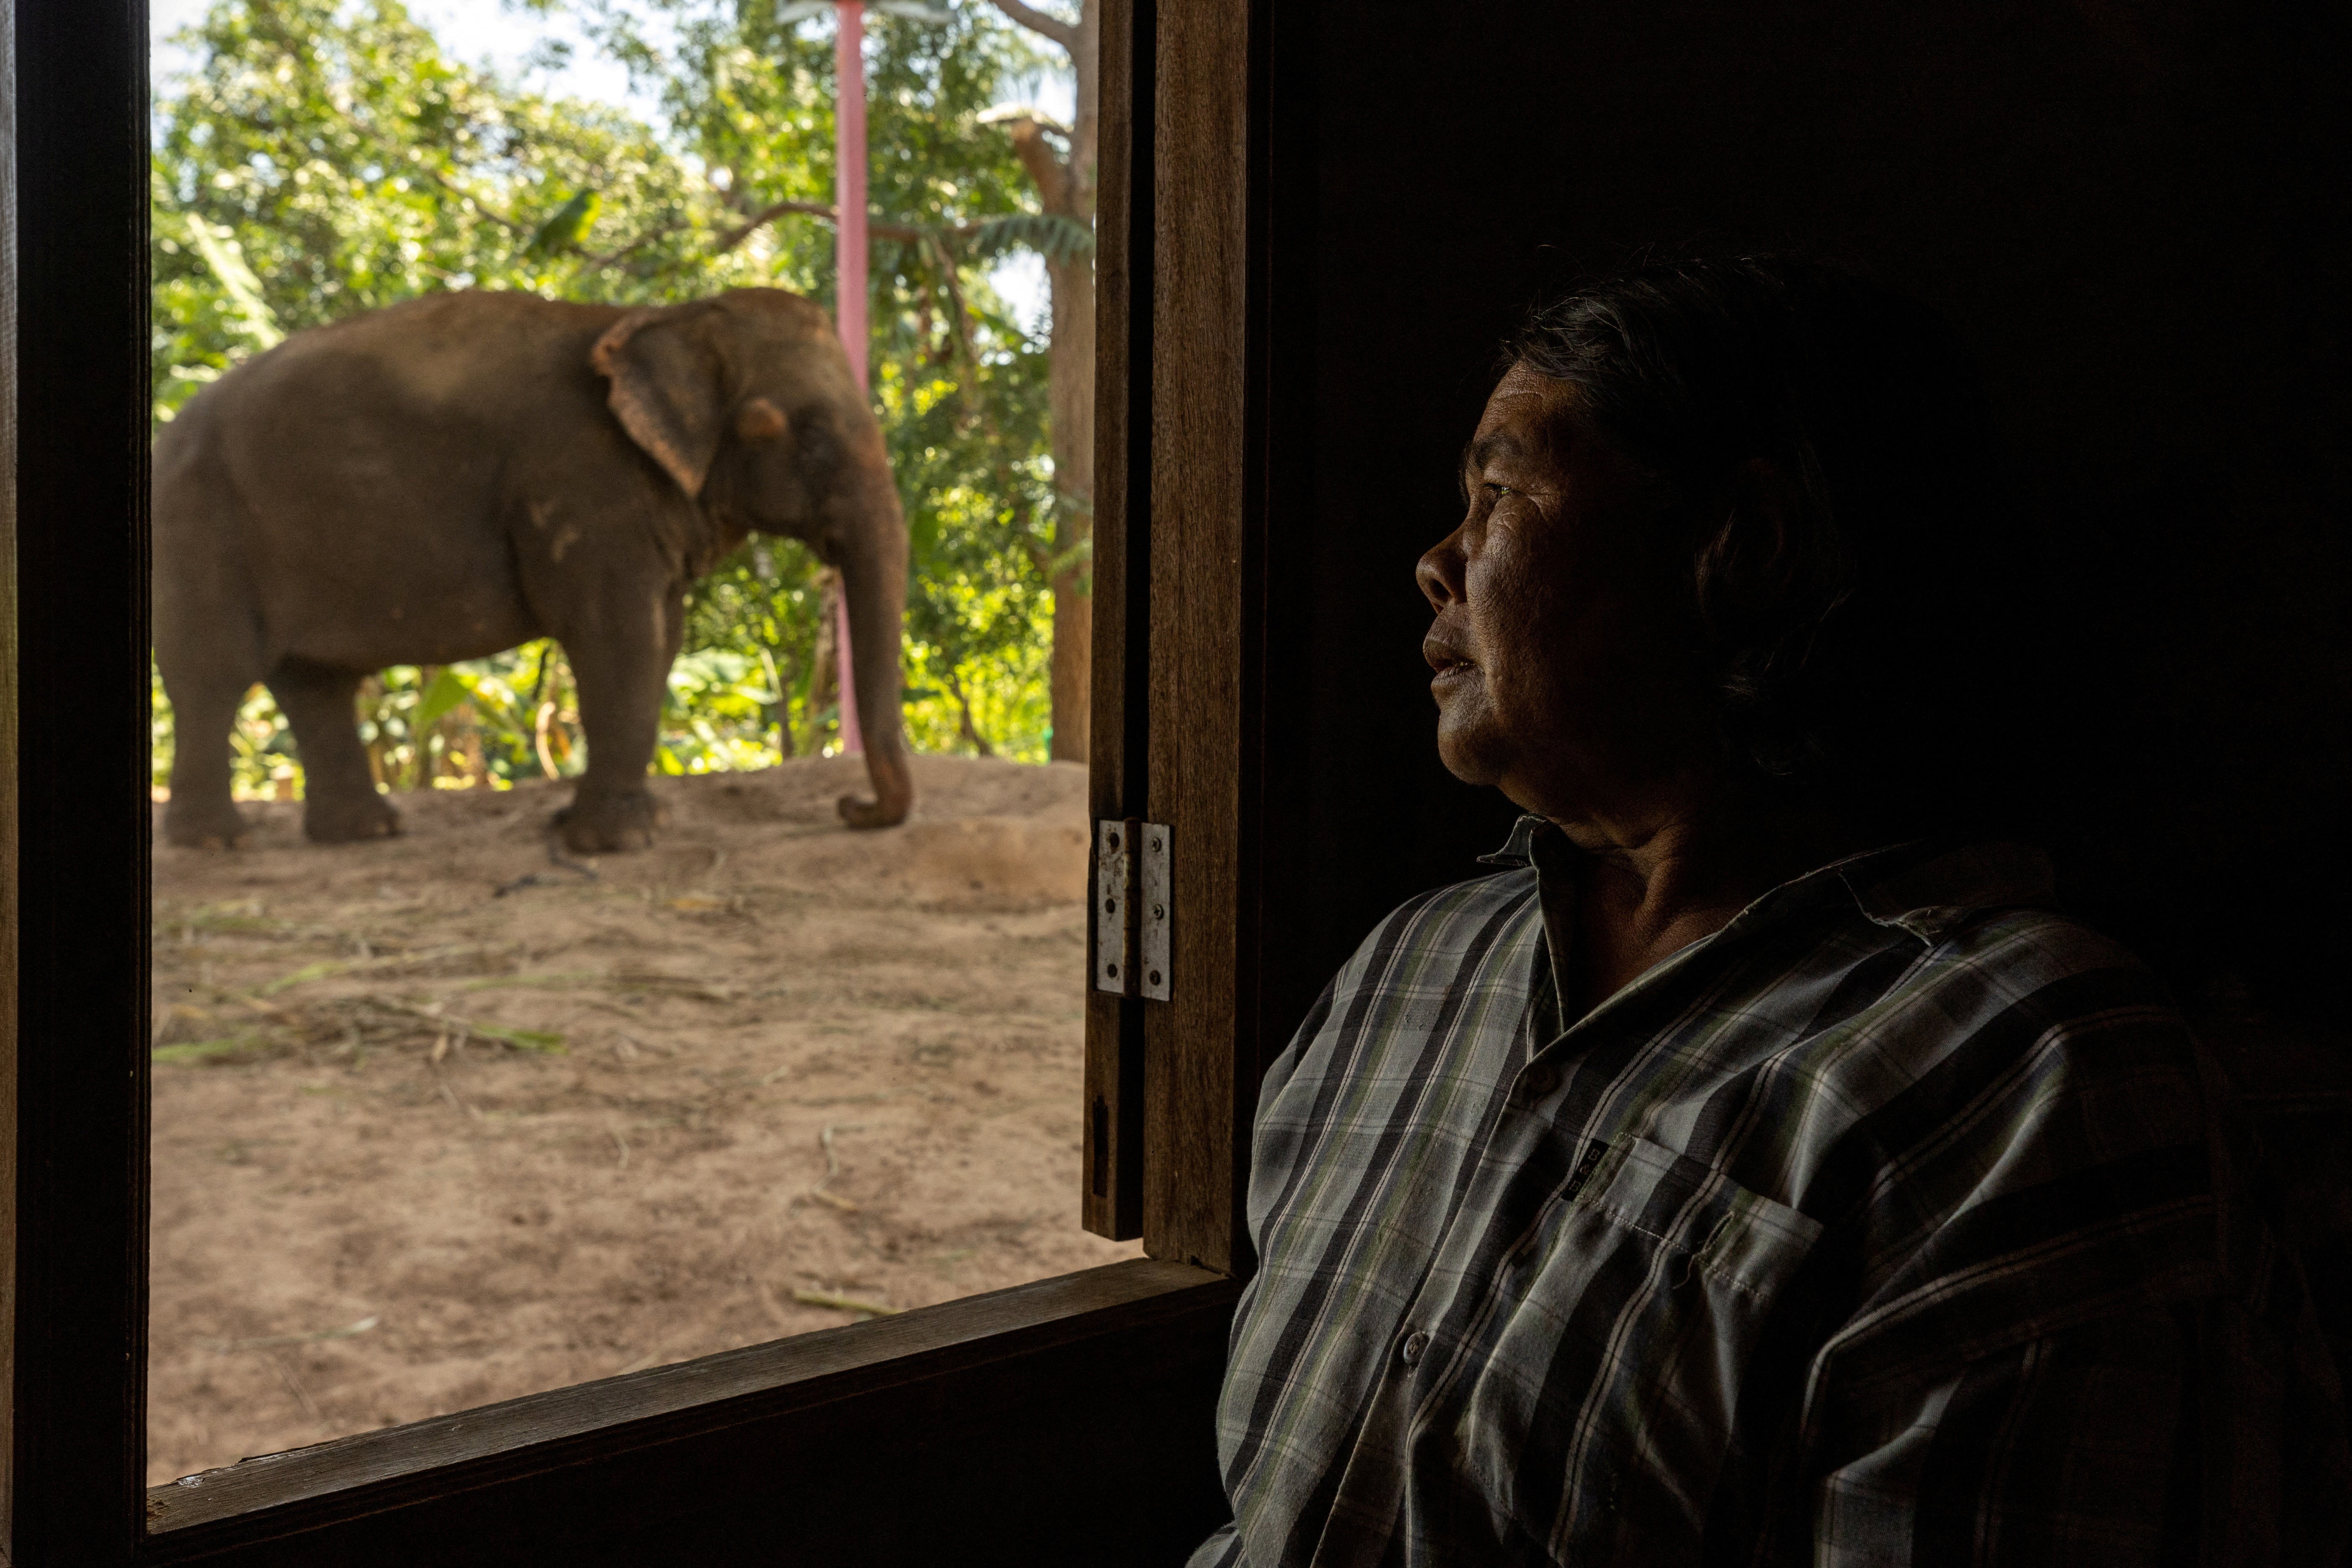 Pensri Sapmak sits inside her house as one of her elephants rests out back in Ban Ta Klang elephant village